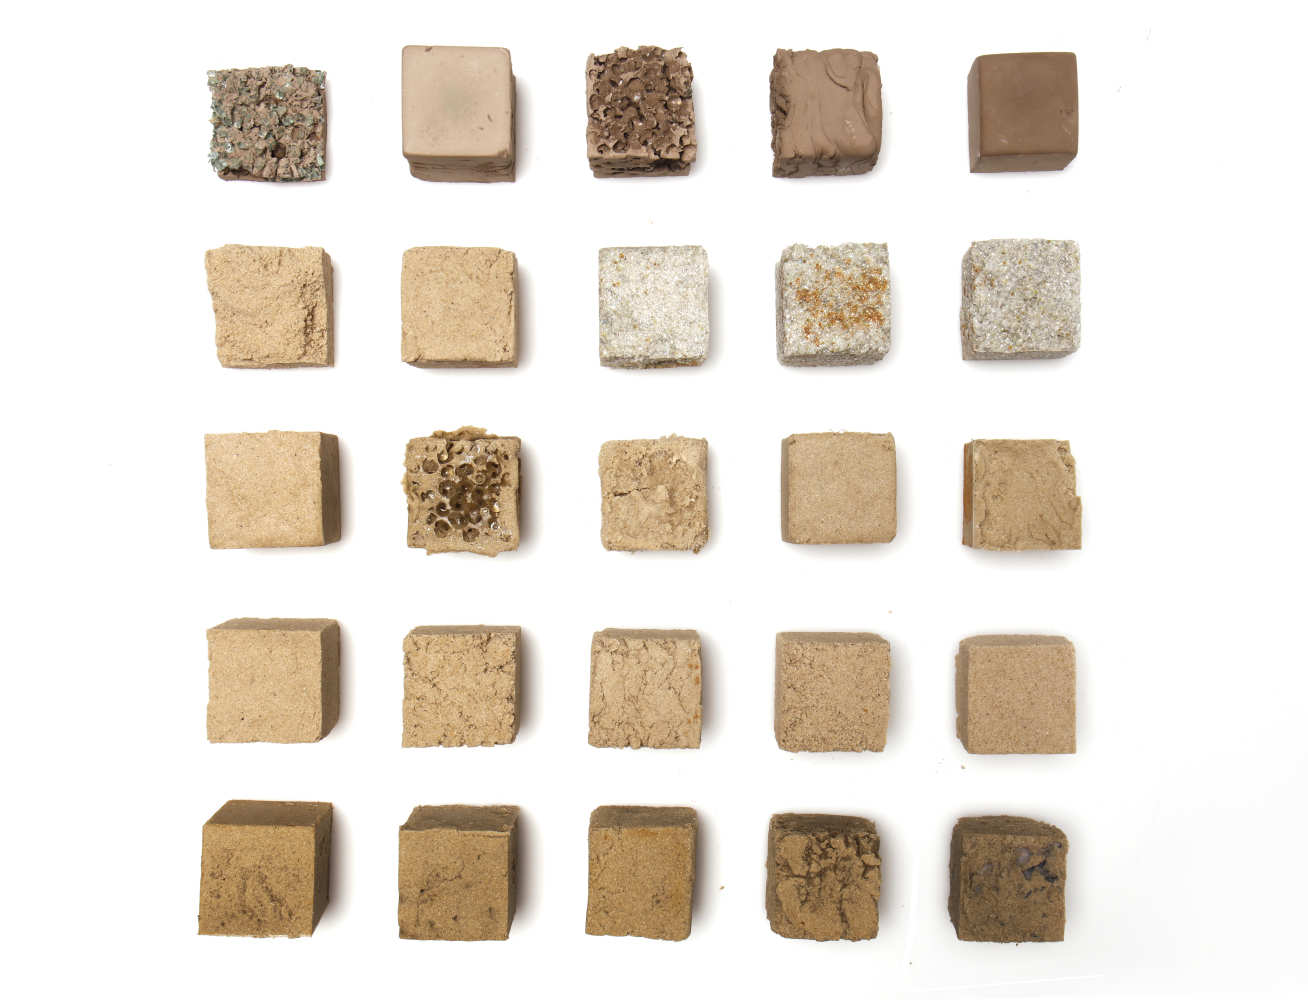 Finite are making a concrete-like material from desert sand